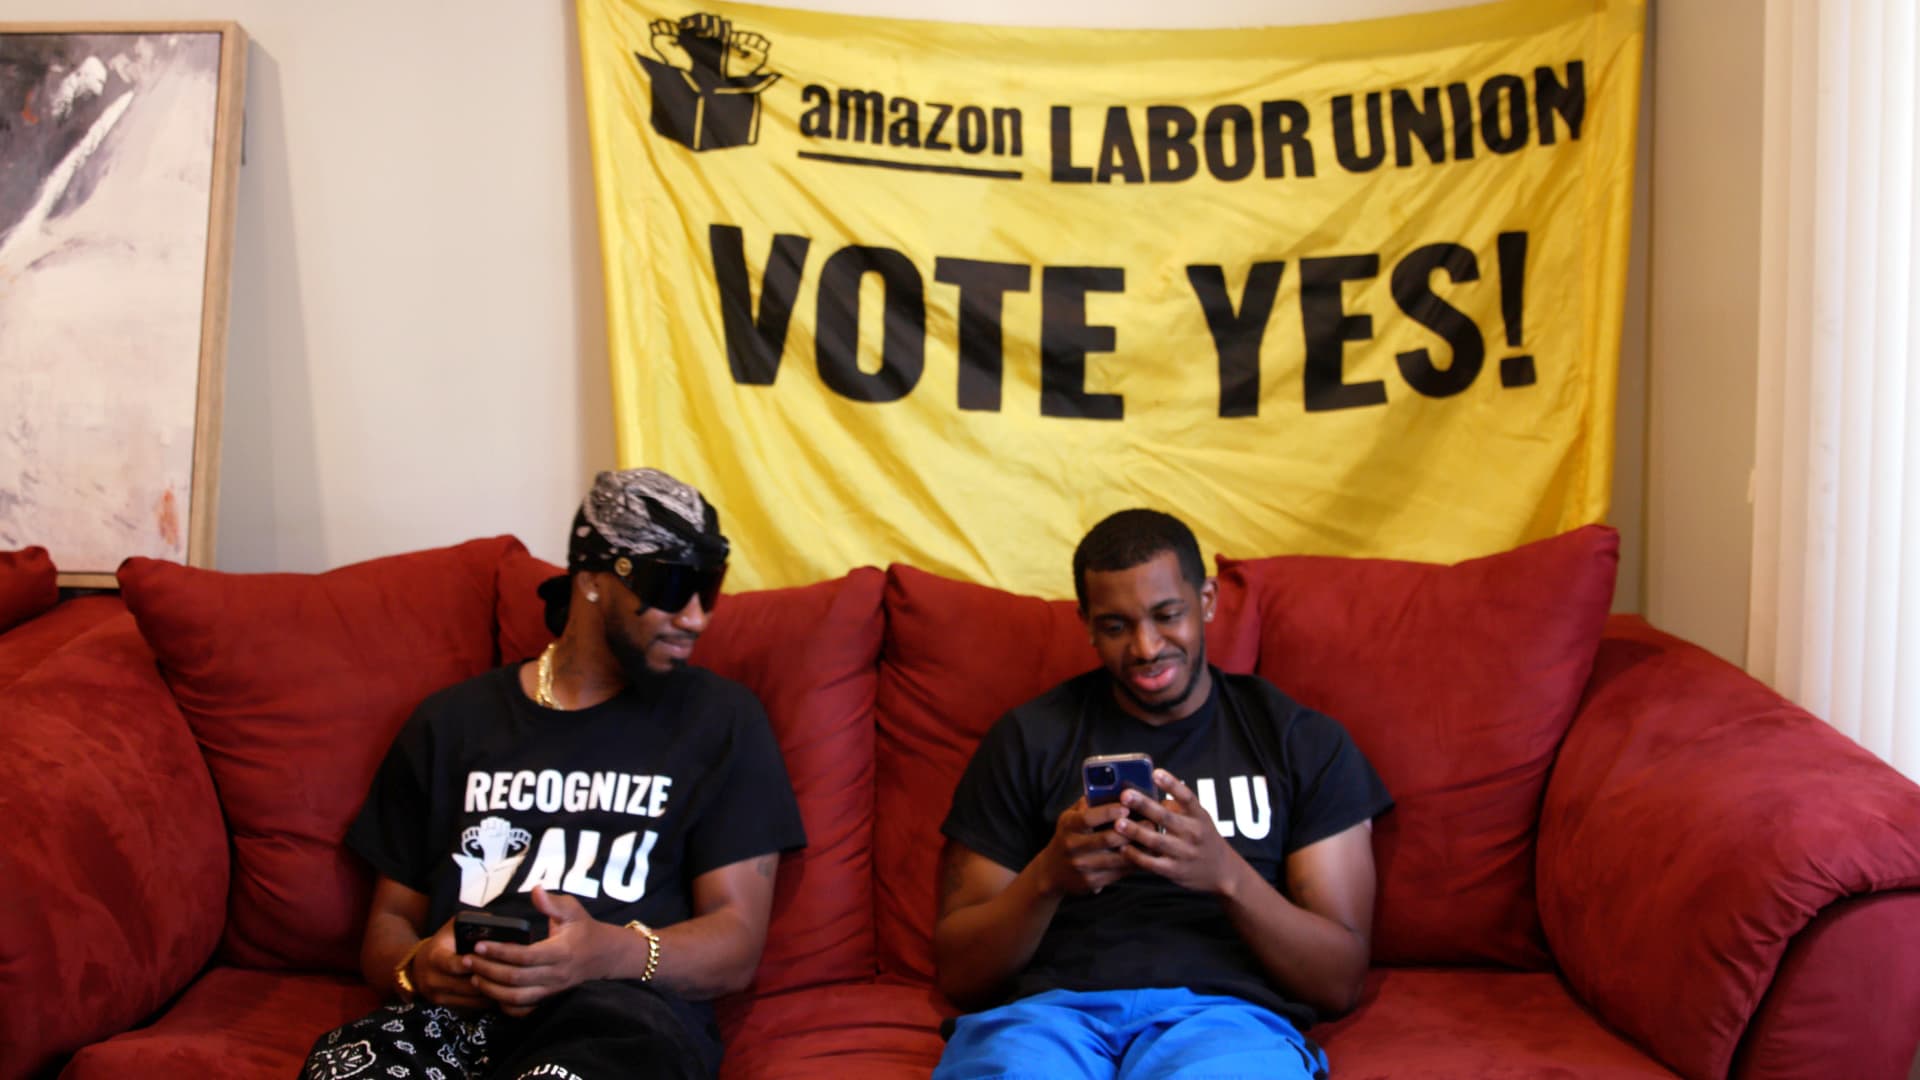 Chris Smalls and Derrick Palmer at the temporary headquarters of the Amazon Labor Union in Staten Island, New York, on June 15, 2022.